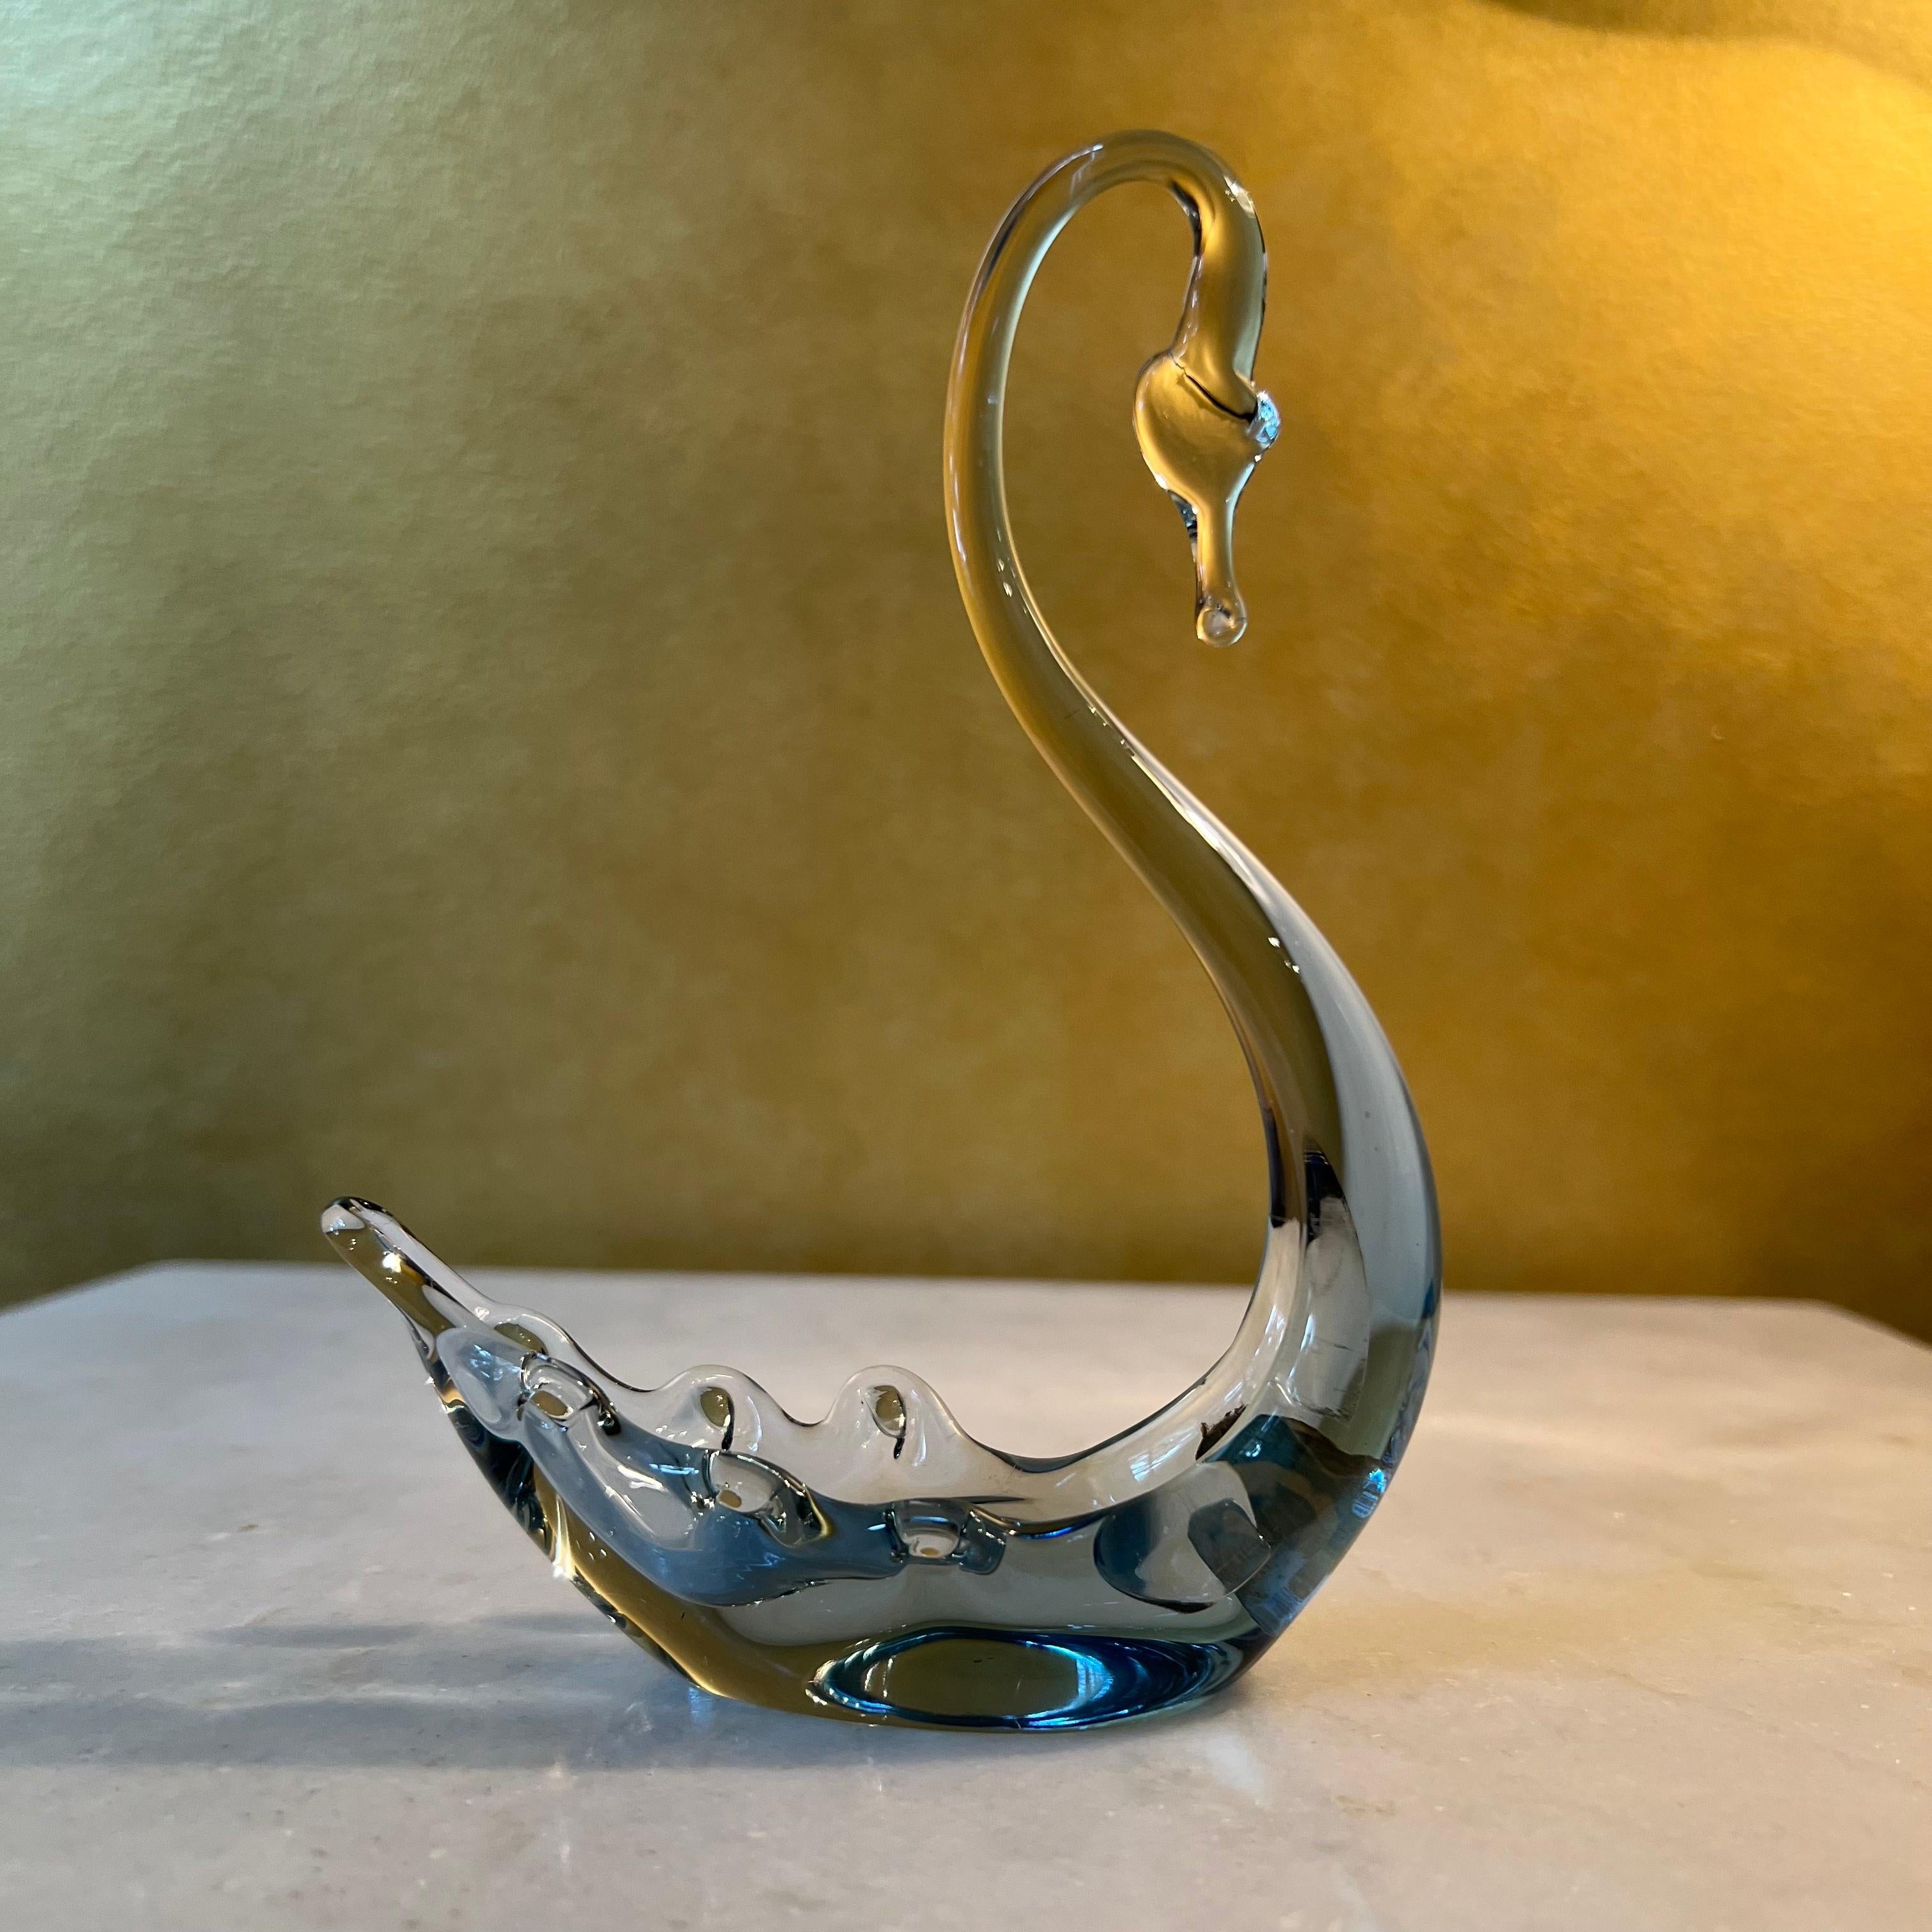 Smoke grey and clear glass swan, sticker Whitefriars, England 

Circa: 1960s

Material: Glass

Country Of Origin: England 

Measurements: 15cm high, 11.5cm length, 3.5cm width

Postage via Australia Post with tracking available